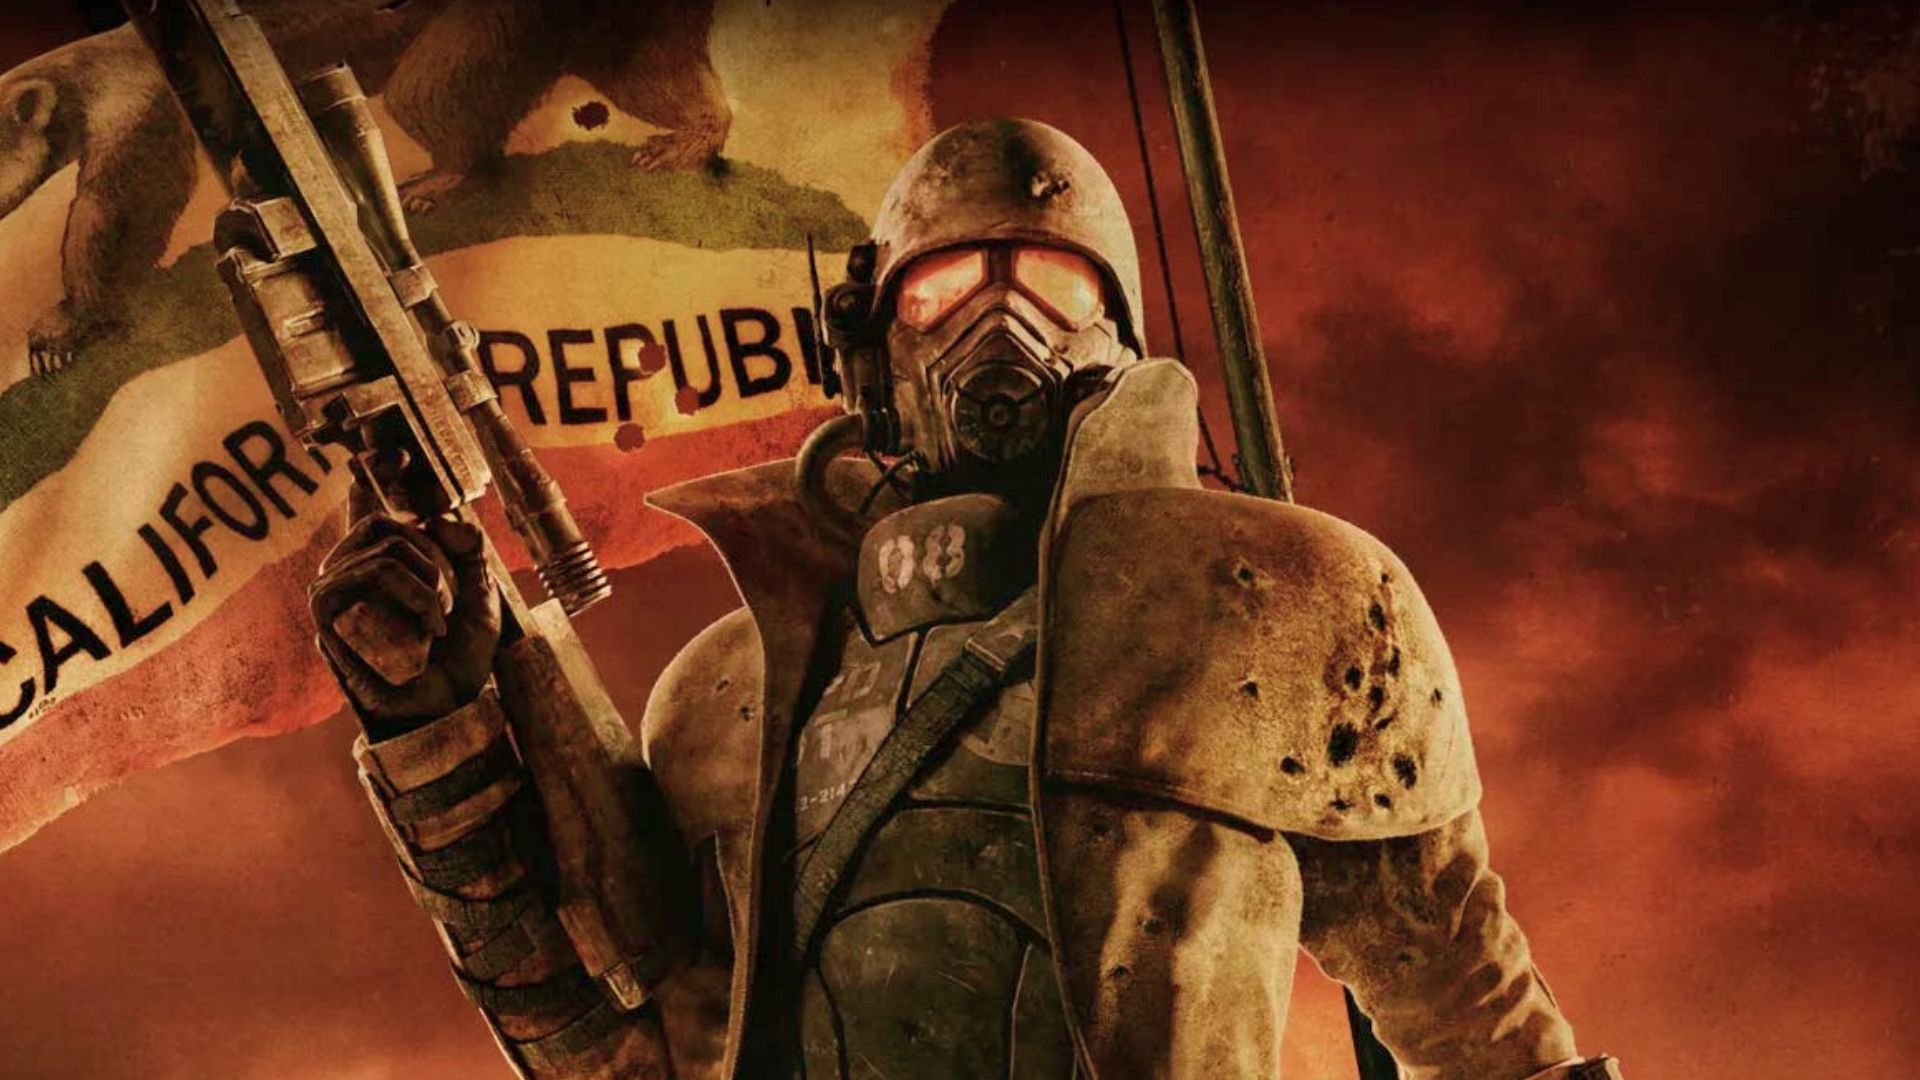 Fallout New Vegas dev pitched Bethesda a number of Elder Scrolls games